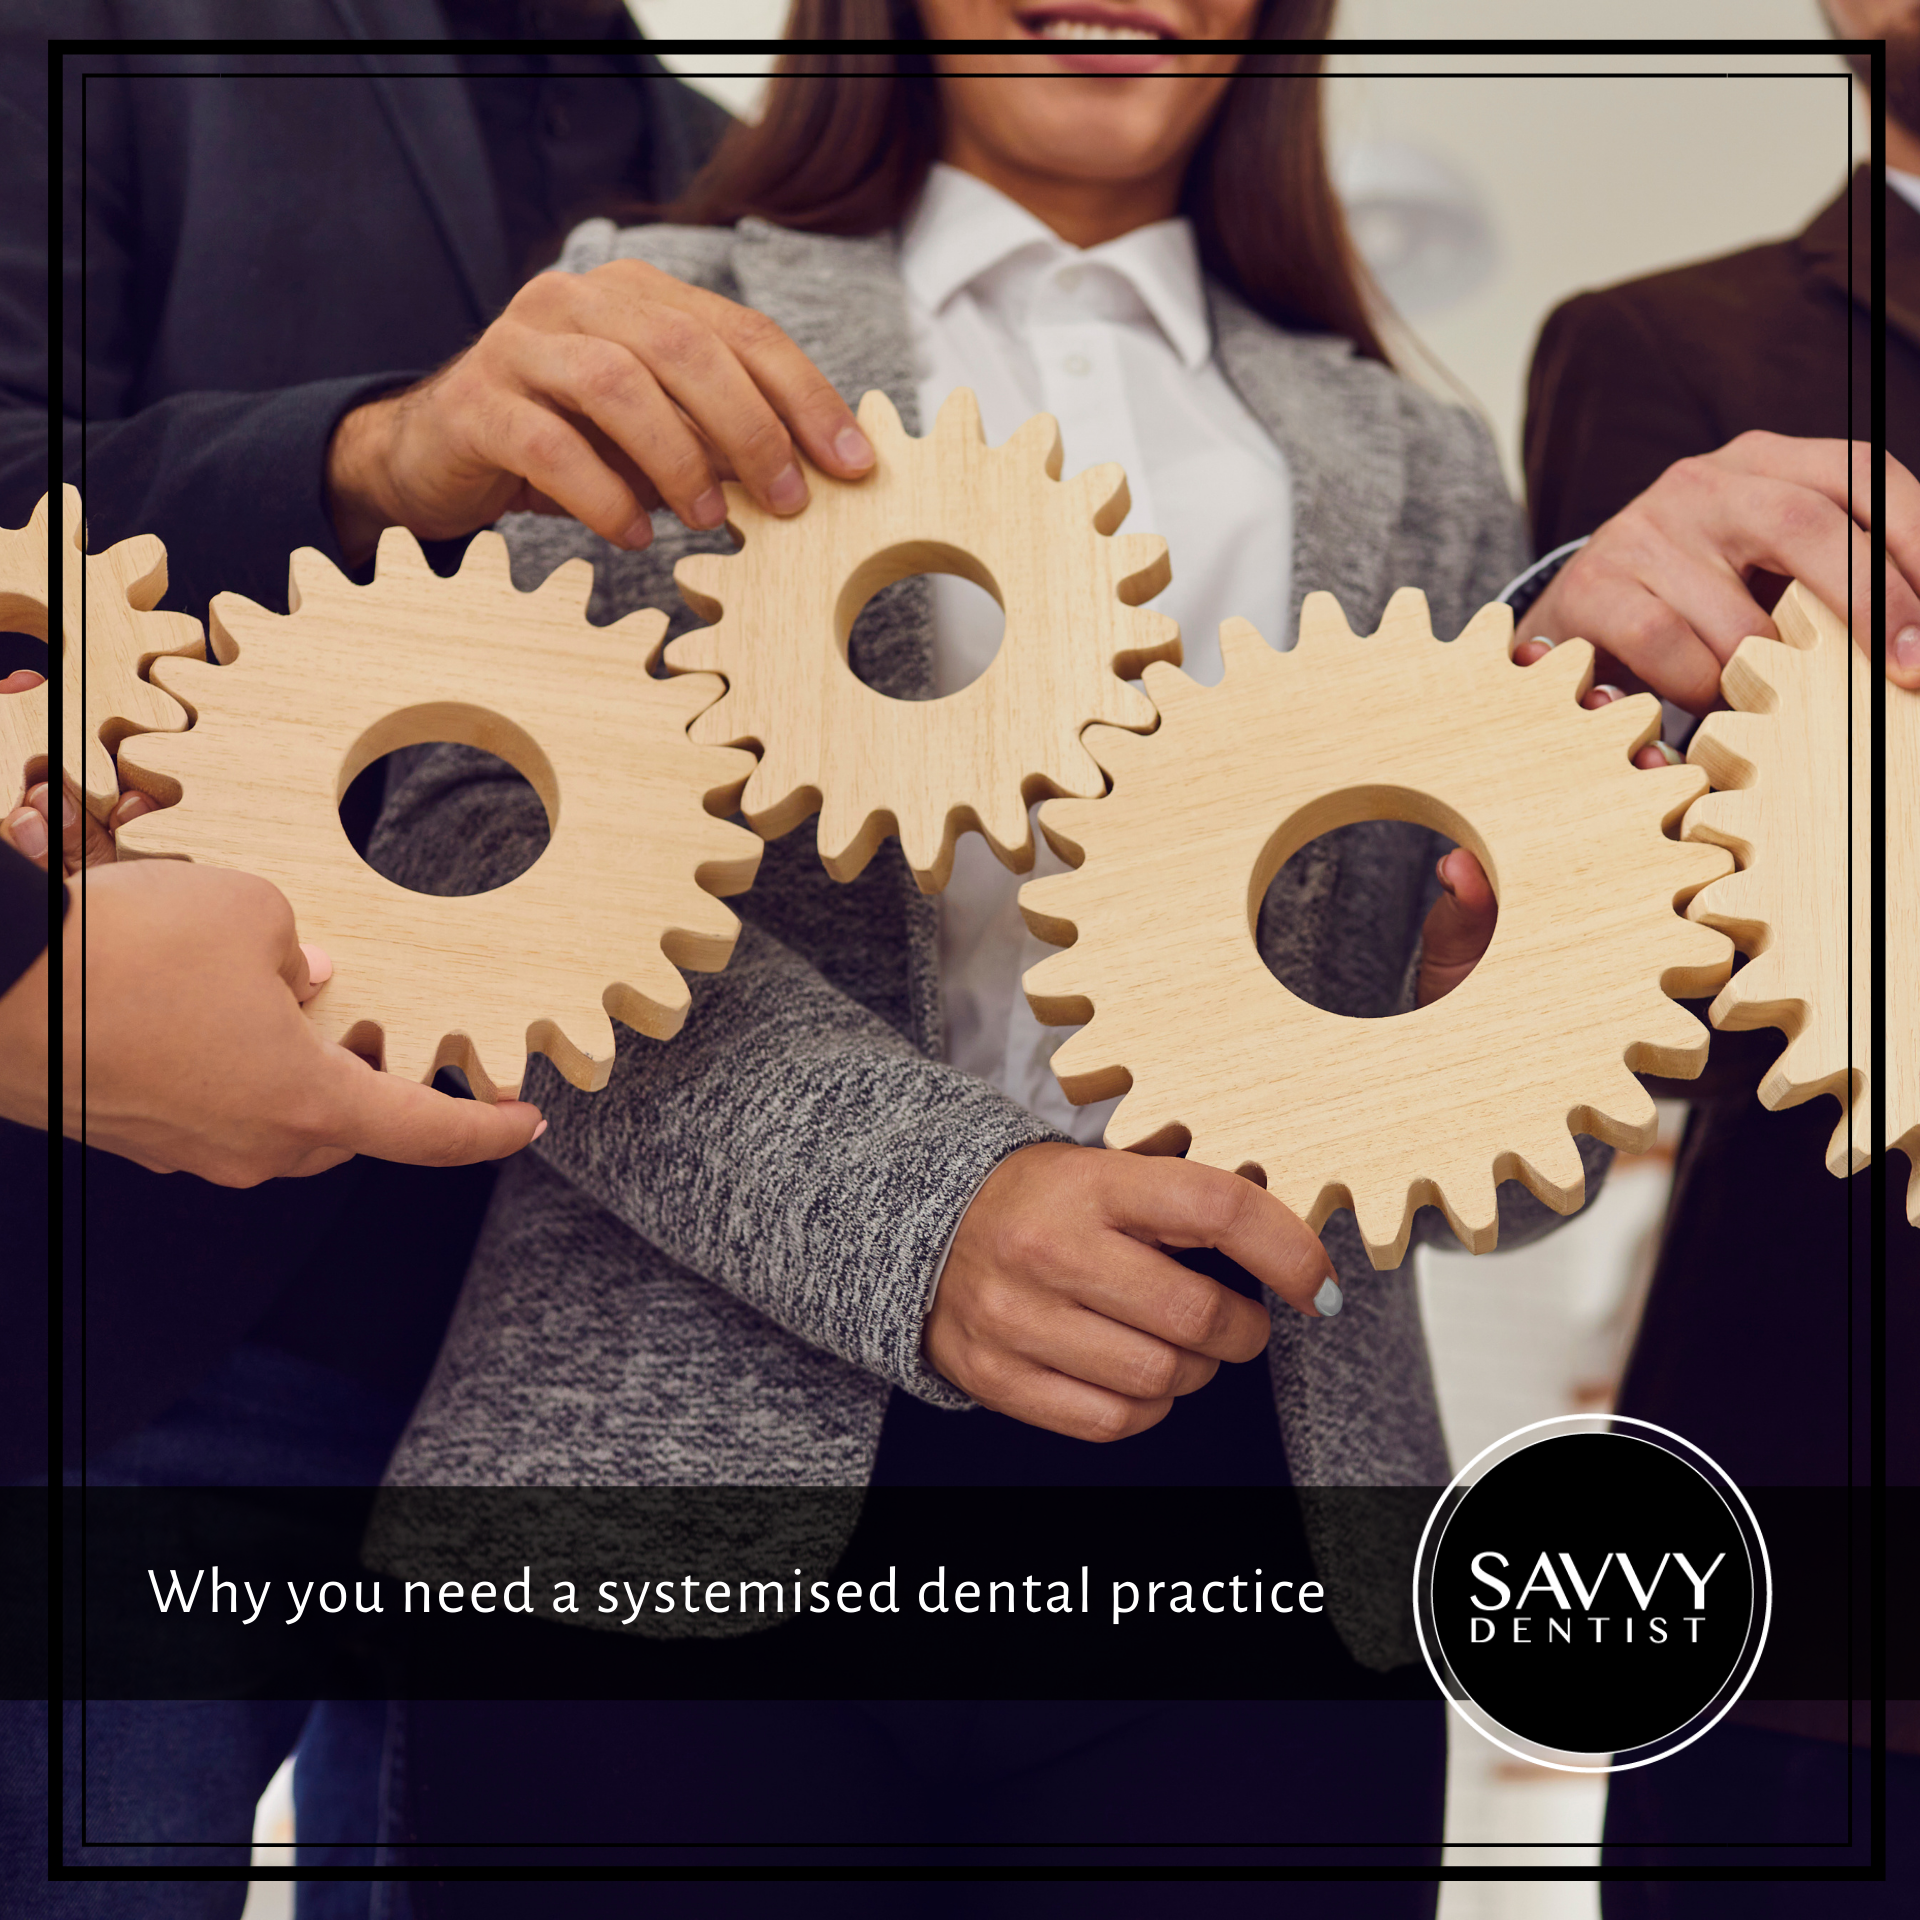 Why Are Systems For Dentists Essential?